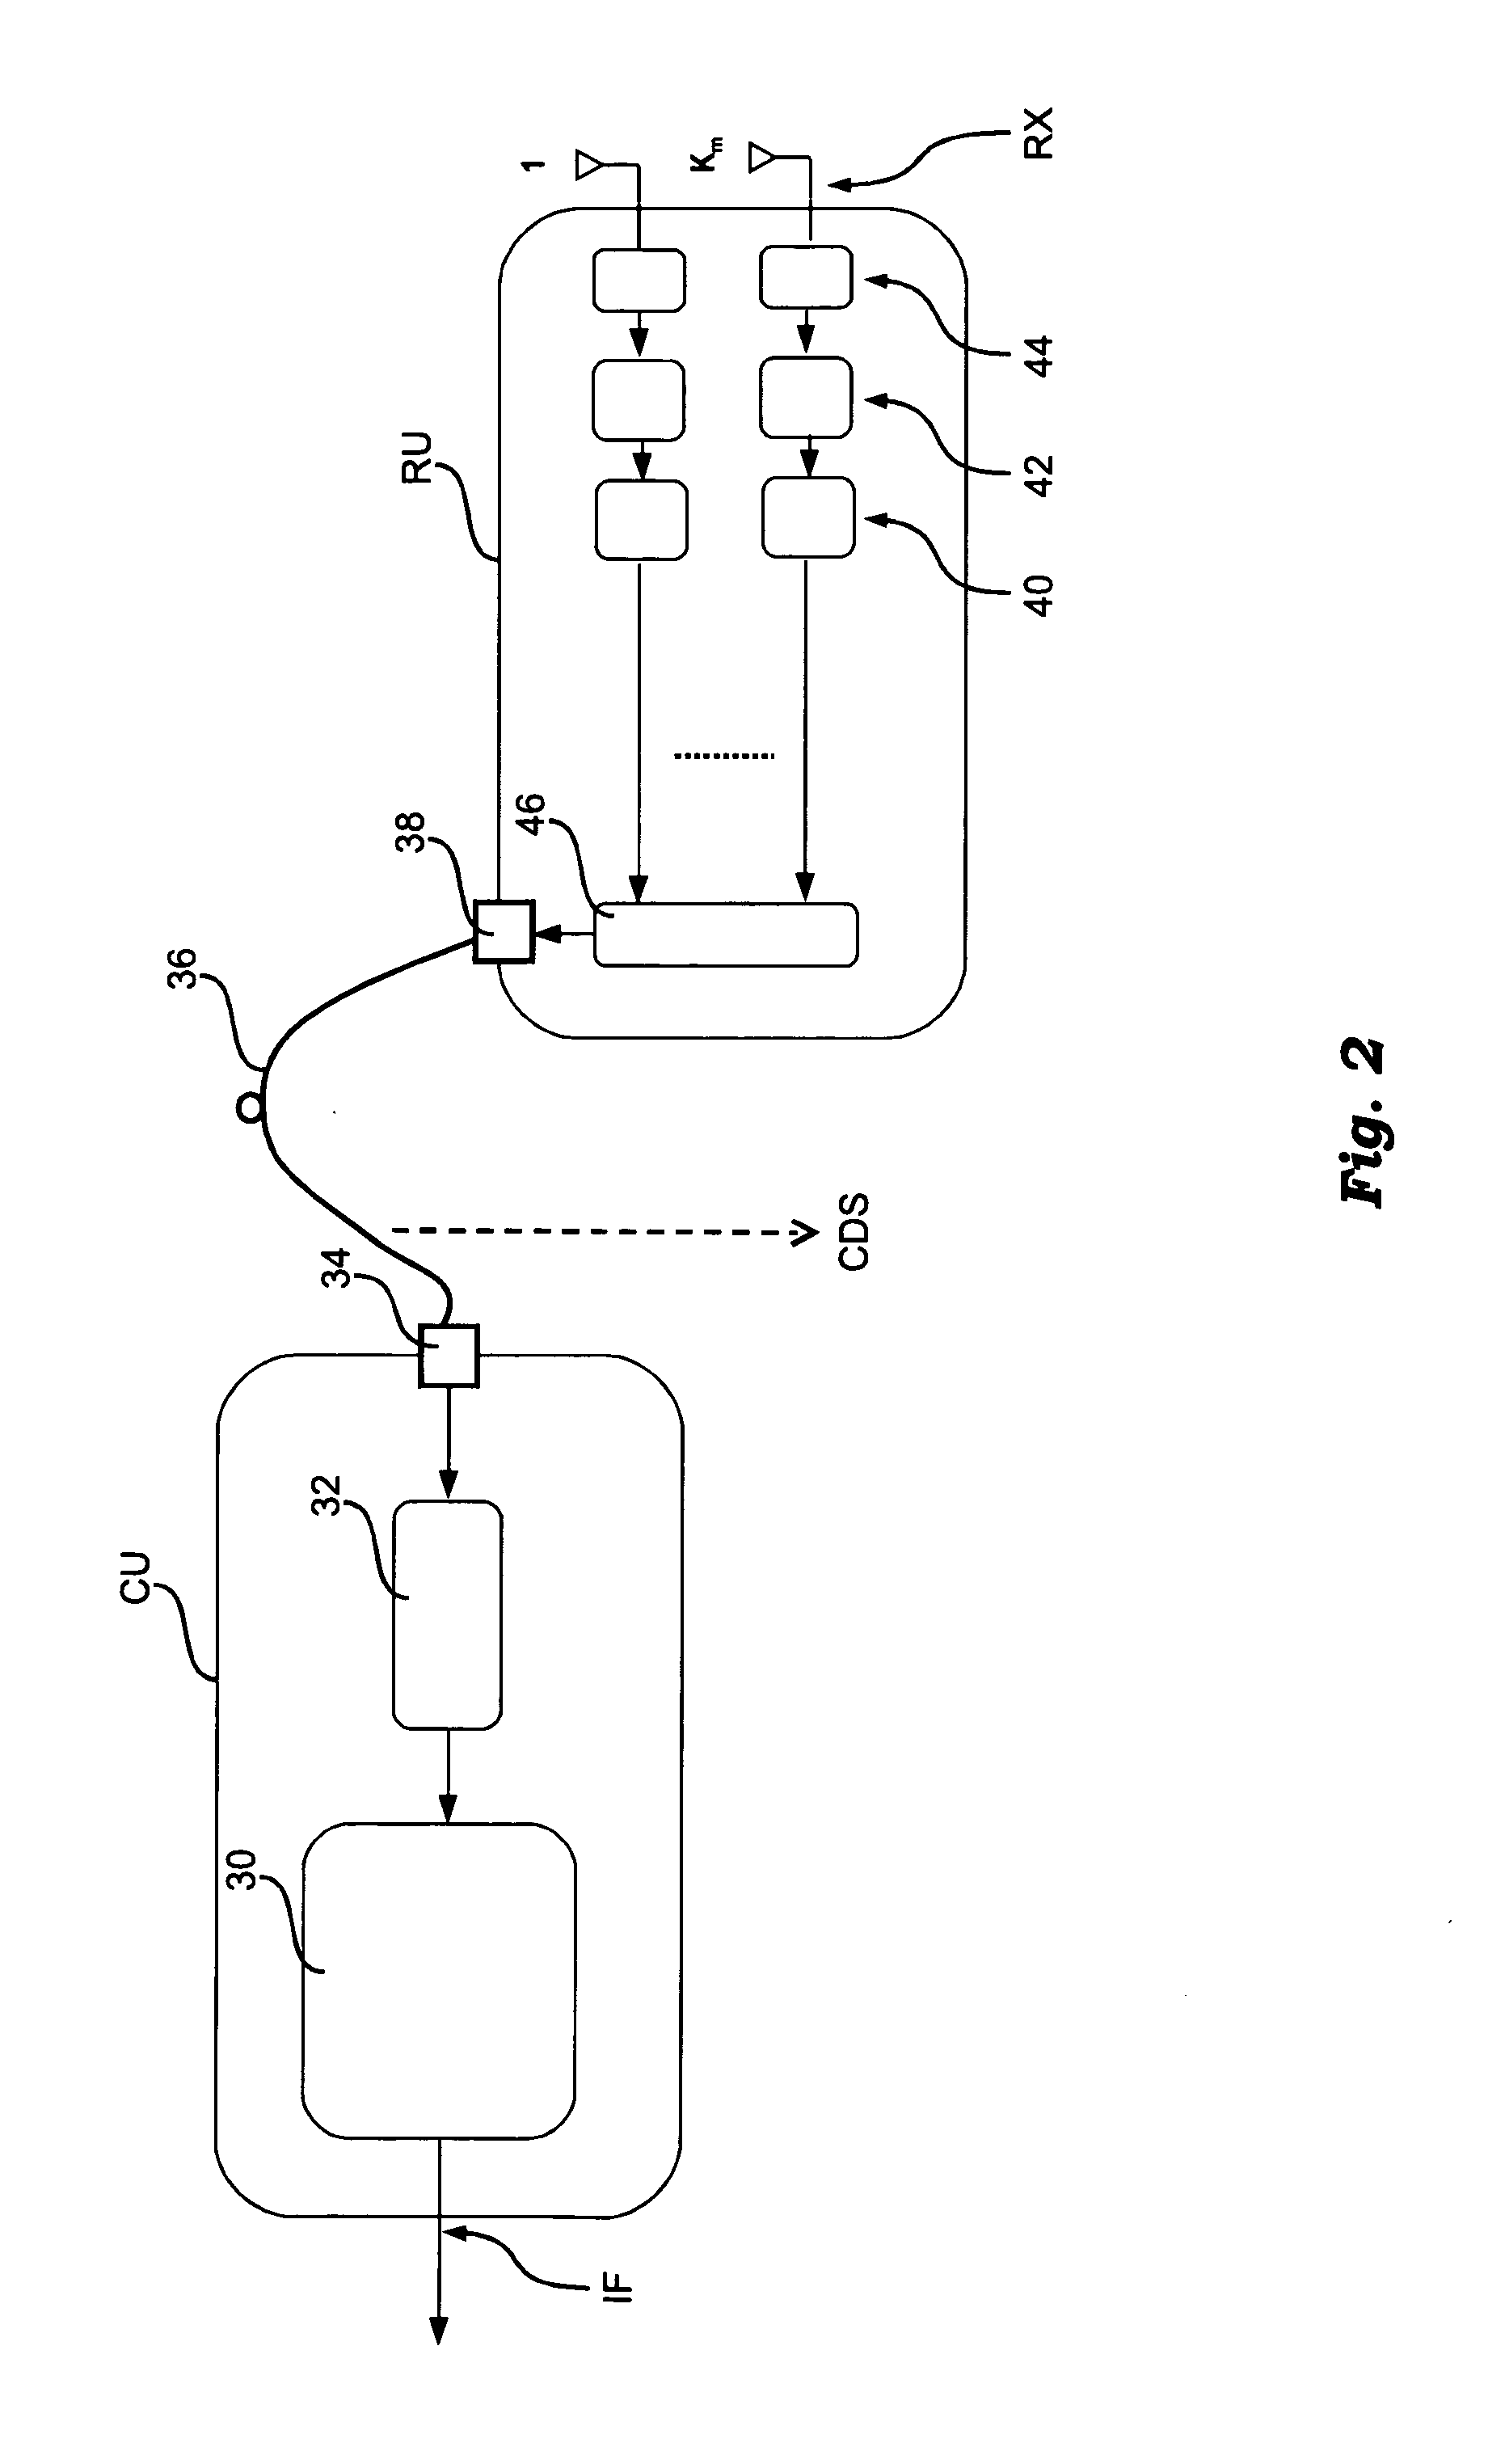 Method for distributed mobile communications, corresponding system and computer program product